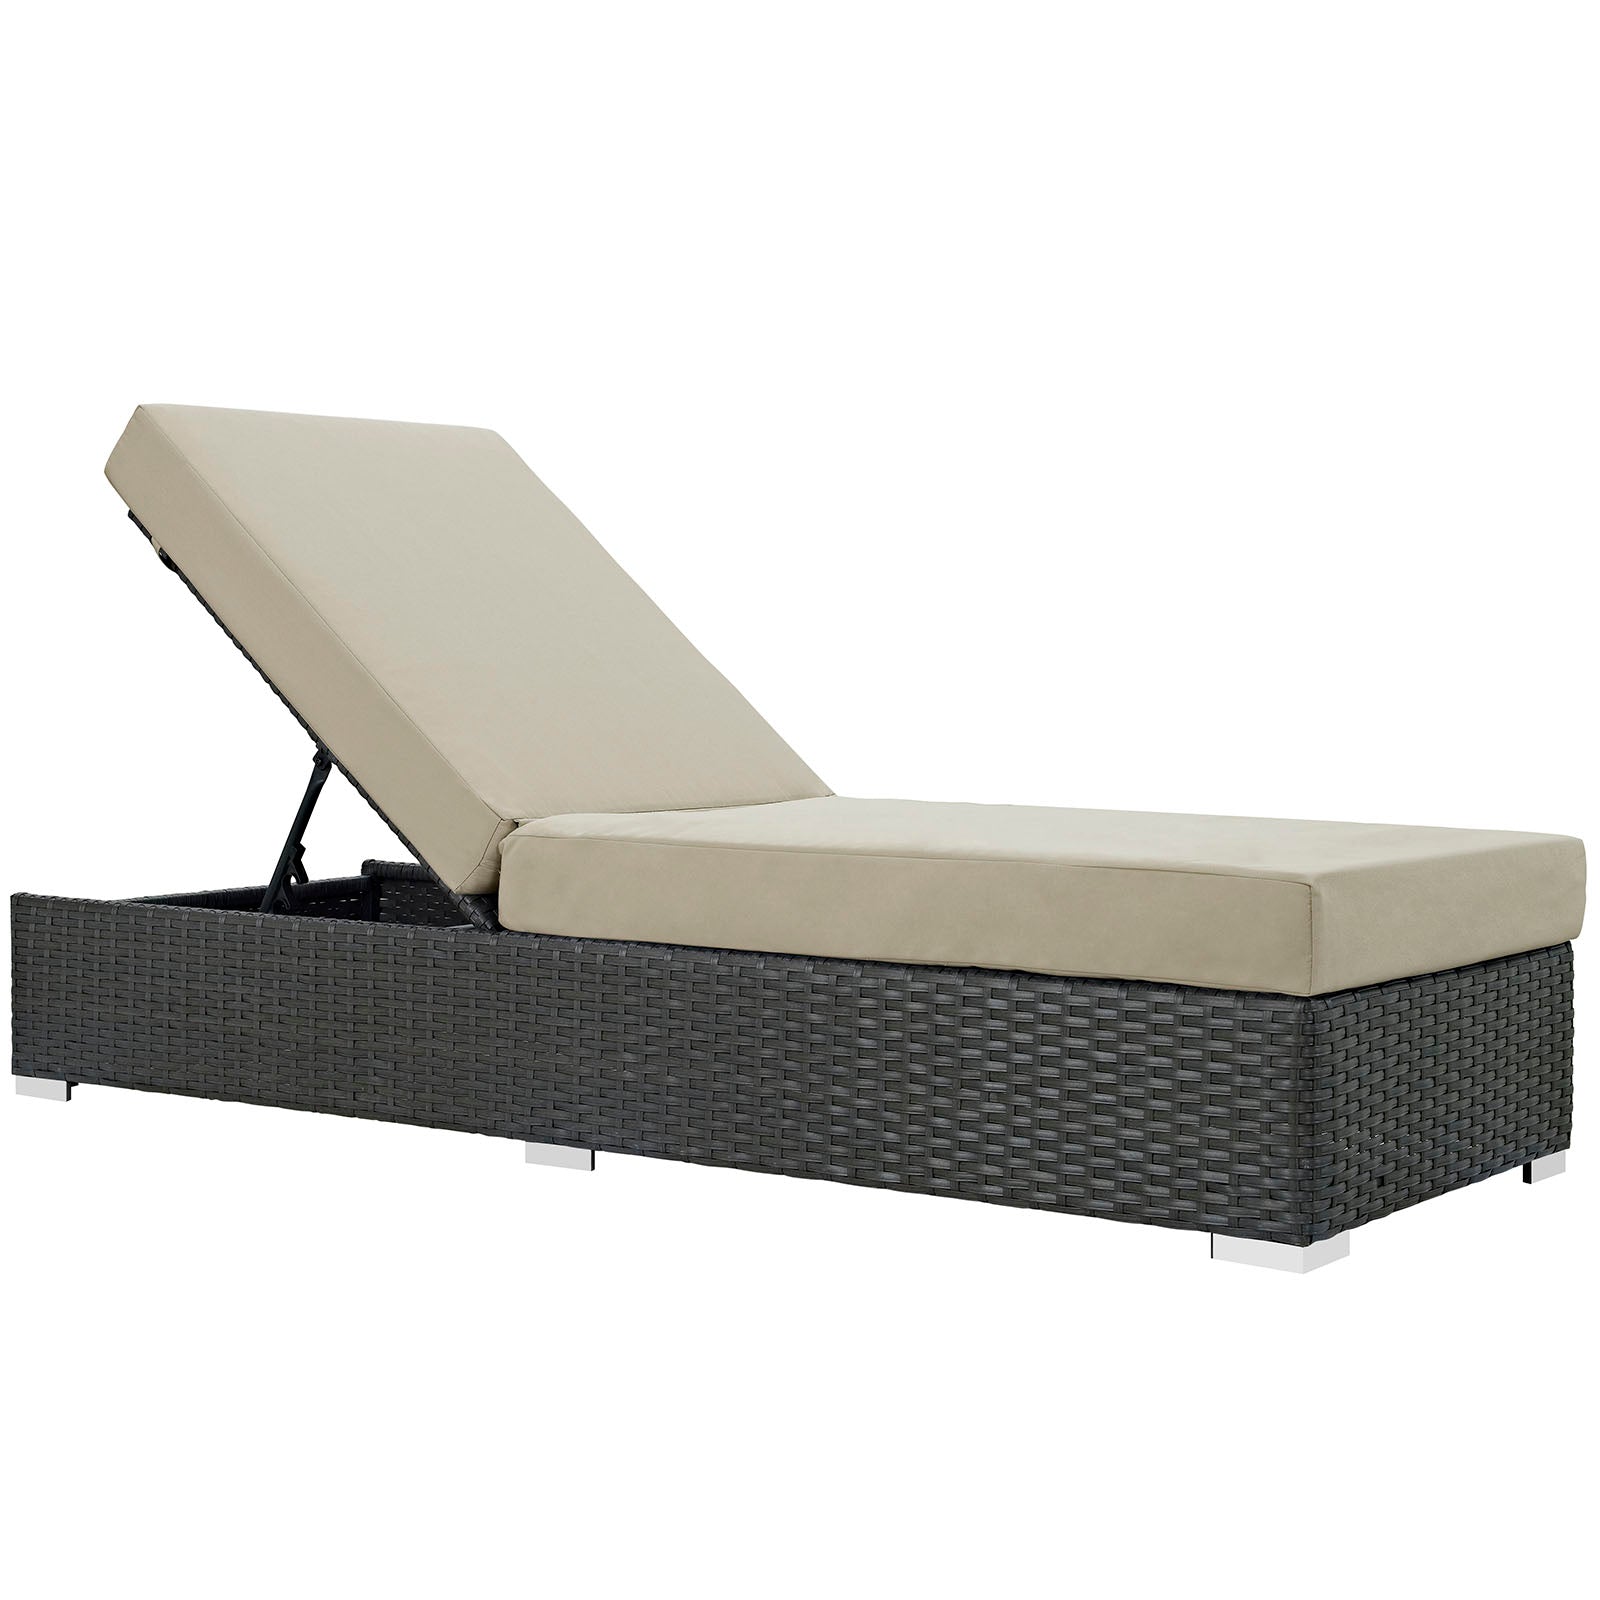 Modway Outdoor Loungers - Sojourn Outdoor Patio Sunbrella Chaise Lounge Canvas Antique Beige